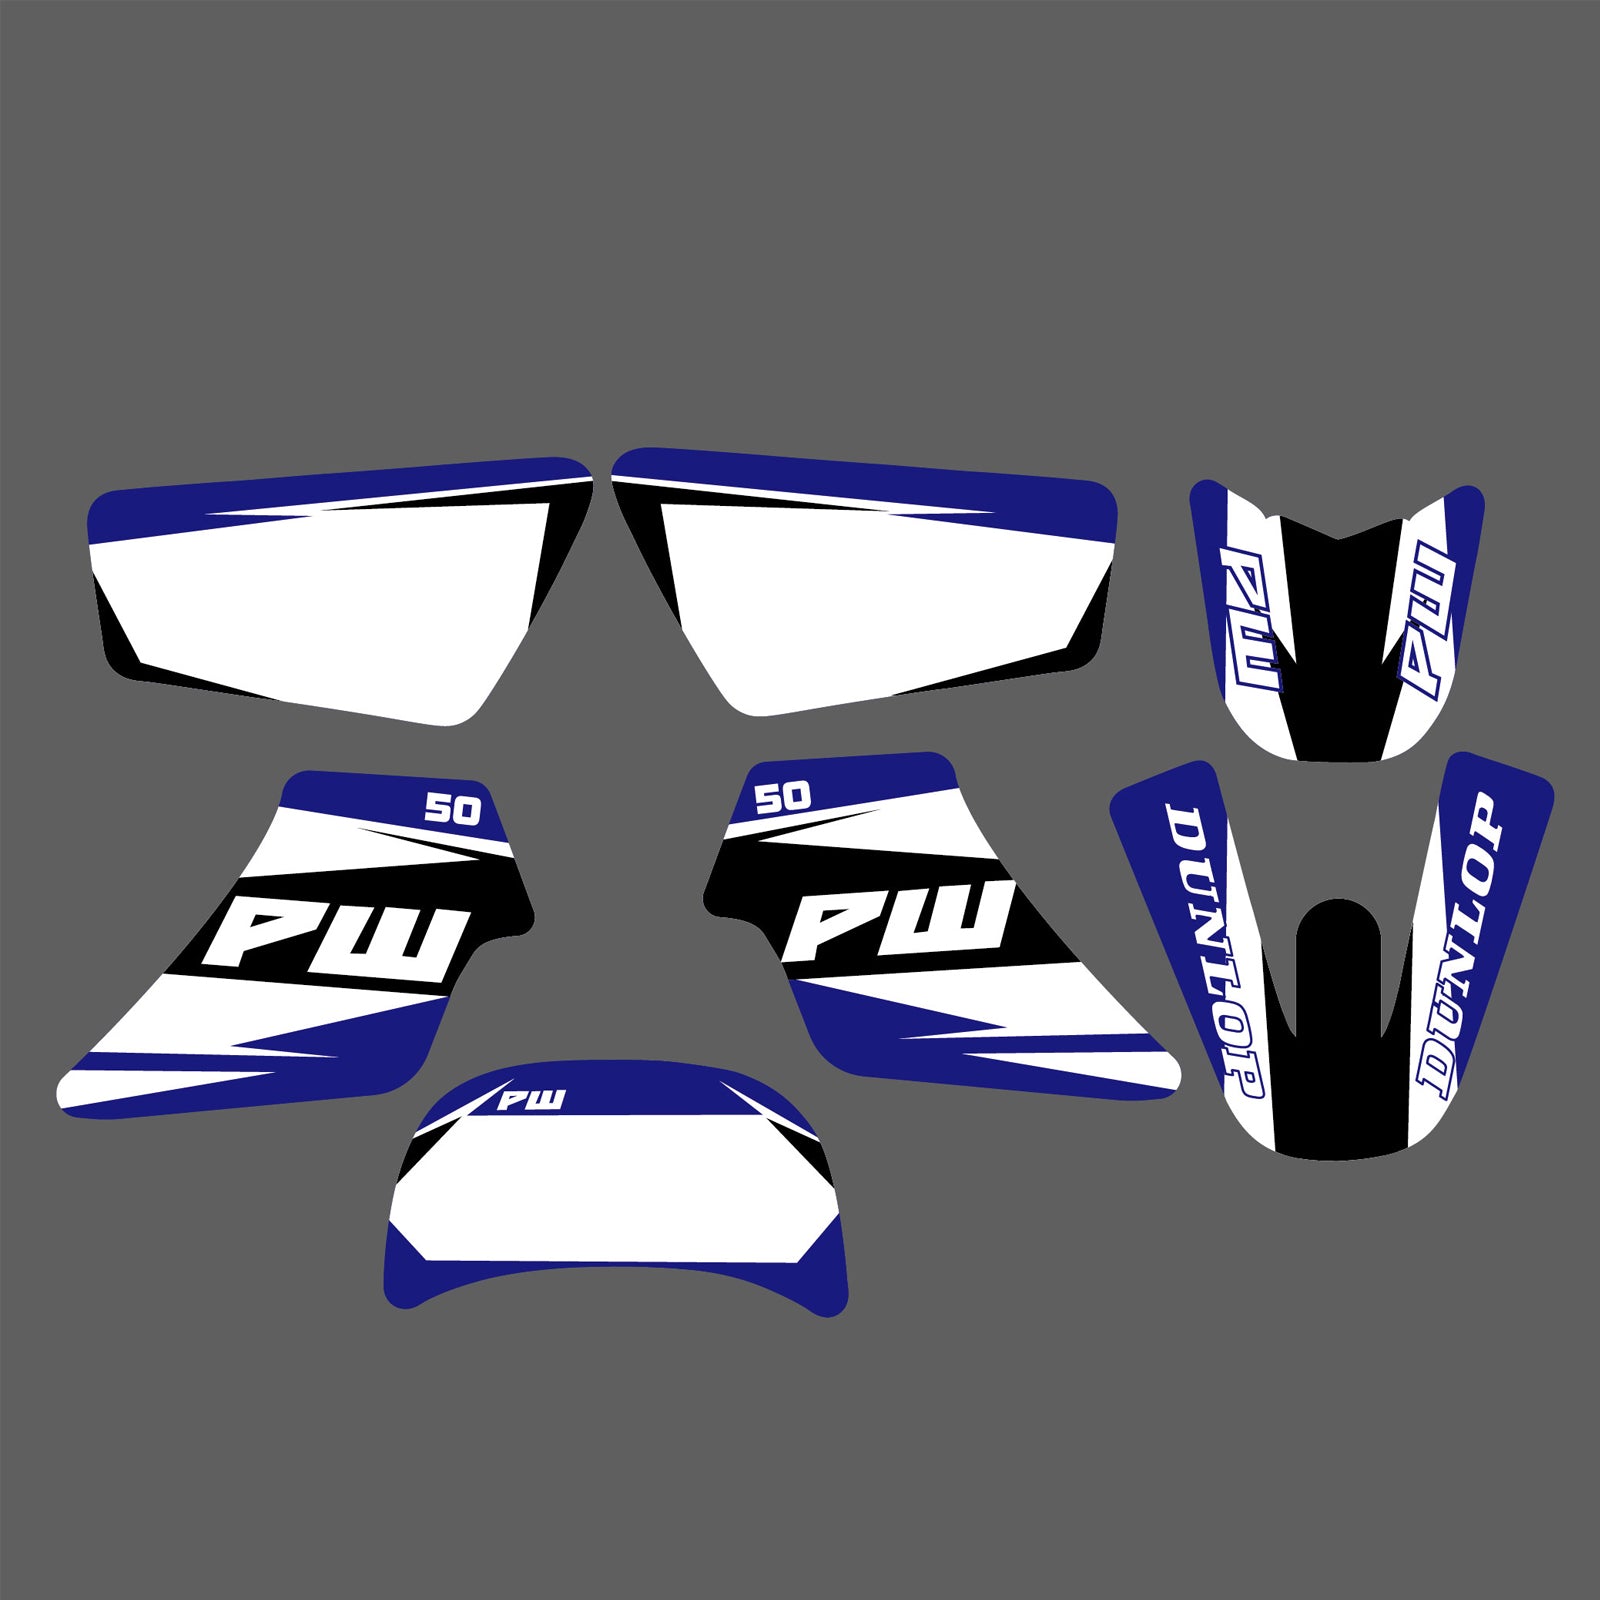 Team Decals Stickers Graphics Kit For YAMAHA PW50 ALL YEARS